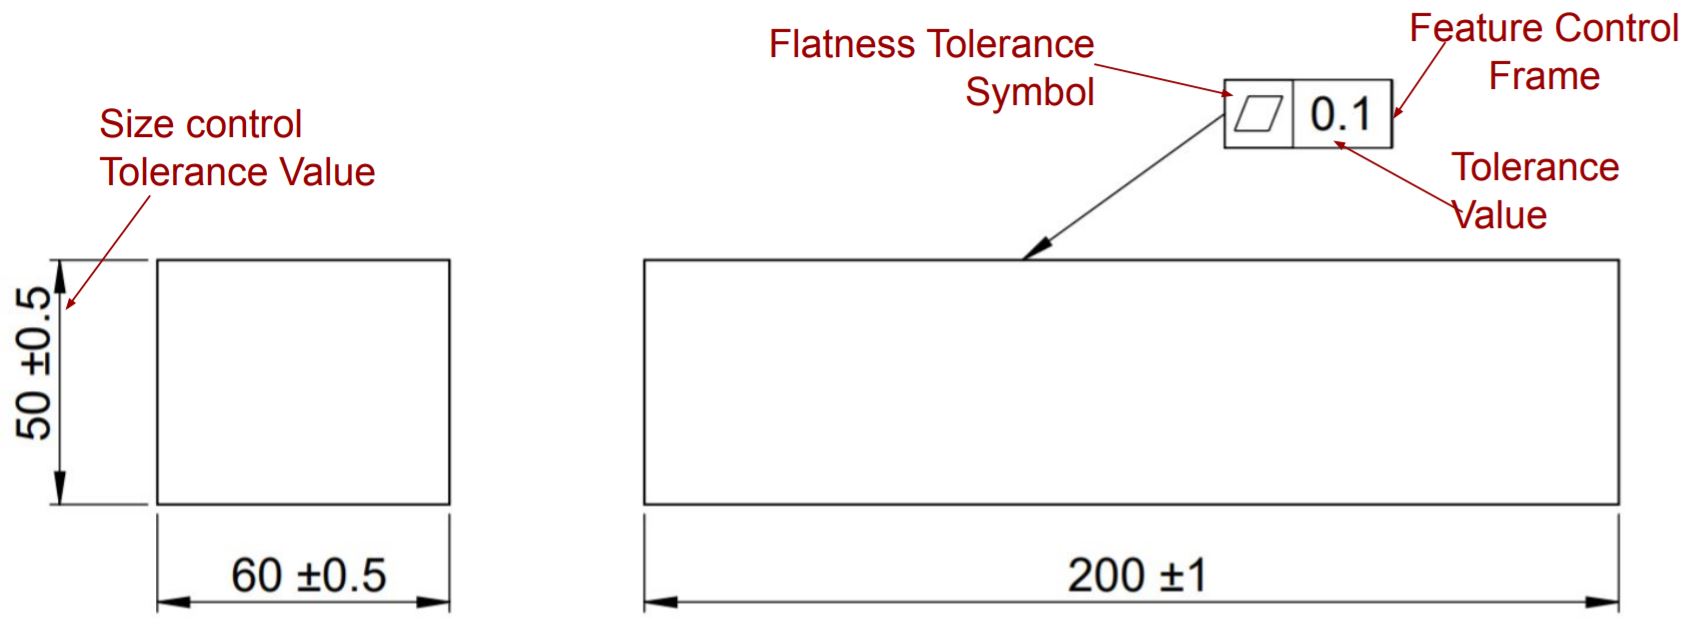 This image shows the representation of flatness tolerance in engineering drawing.